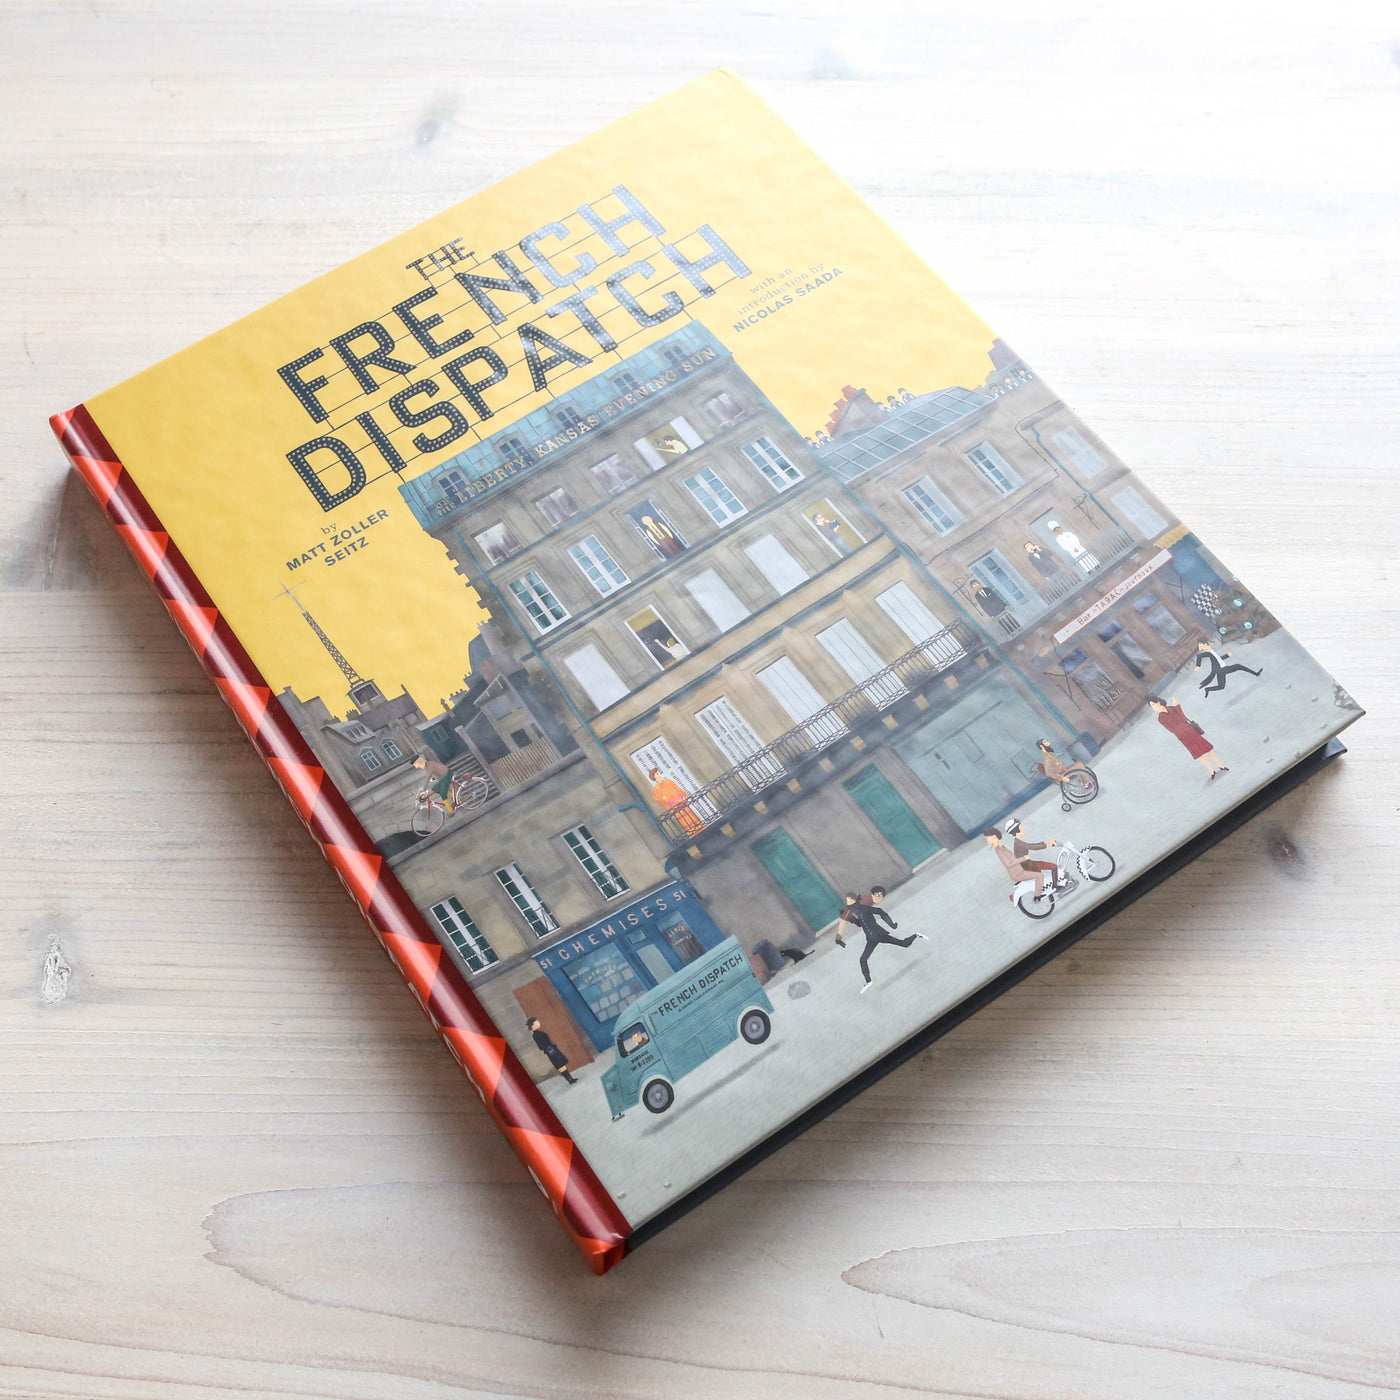 The French Dispatch: The Wes Anderson Collection